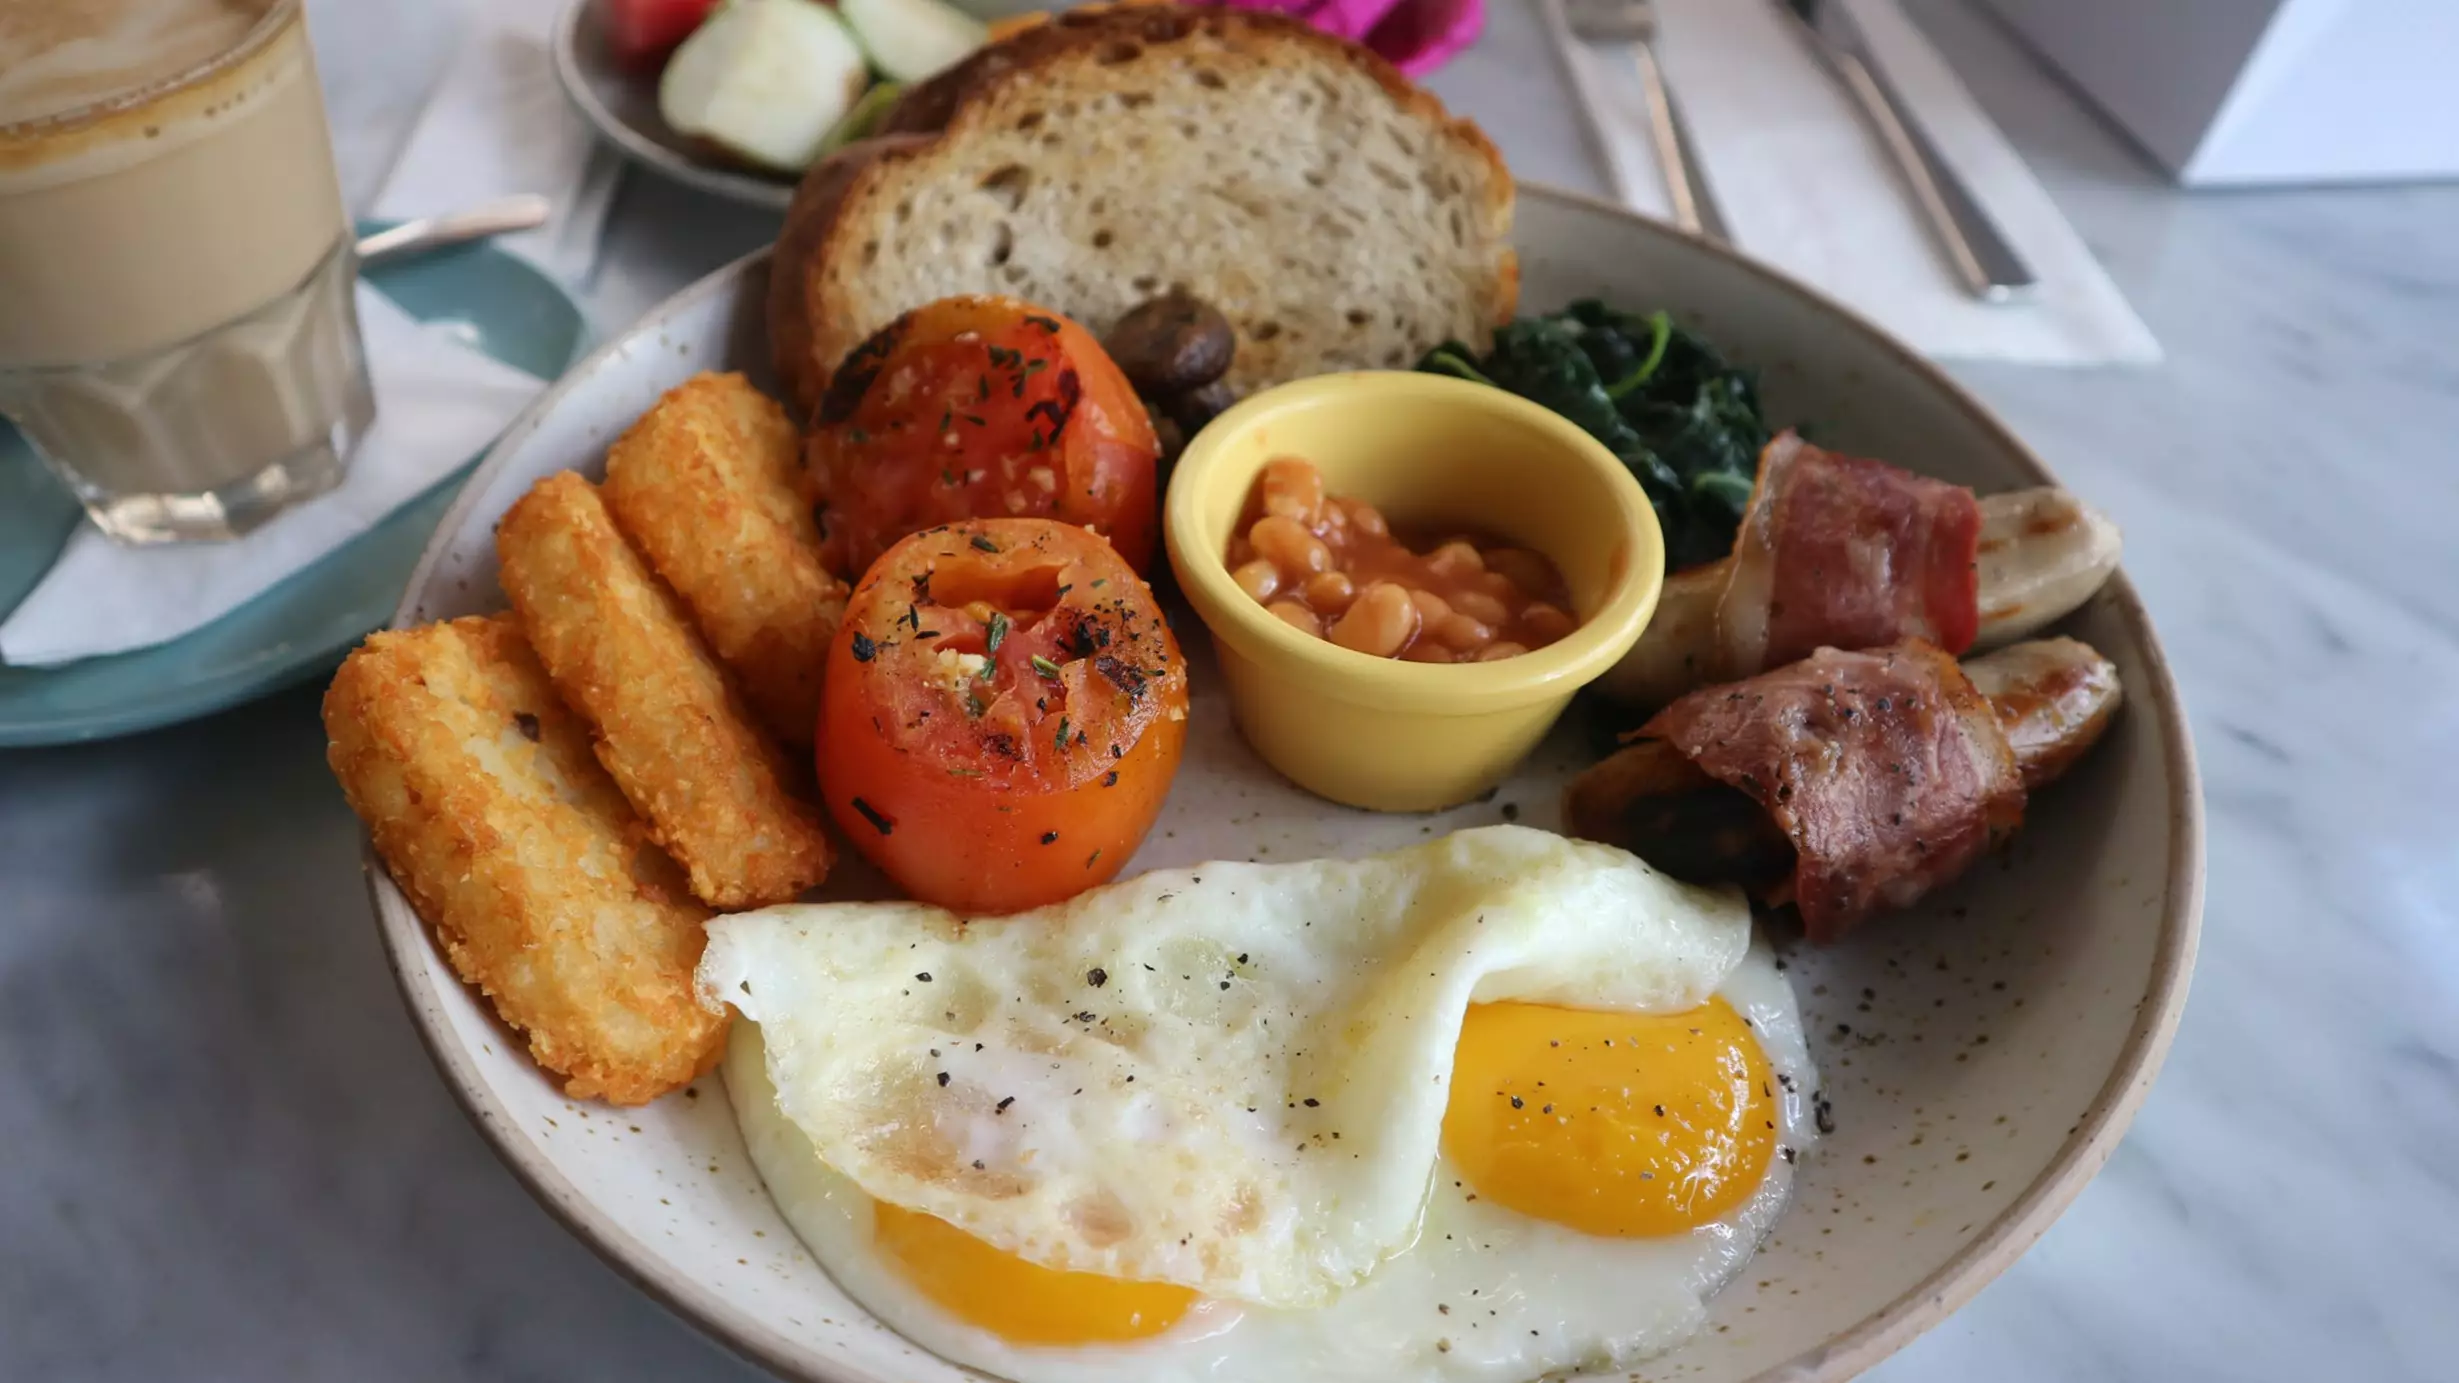 The Full English Breakfast Is Dying Out, According To Experts